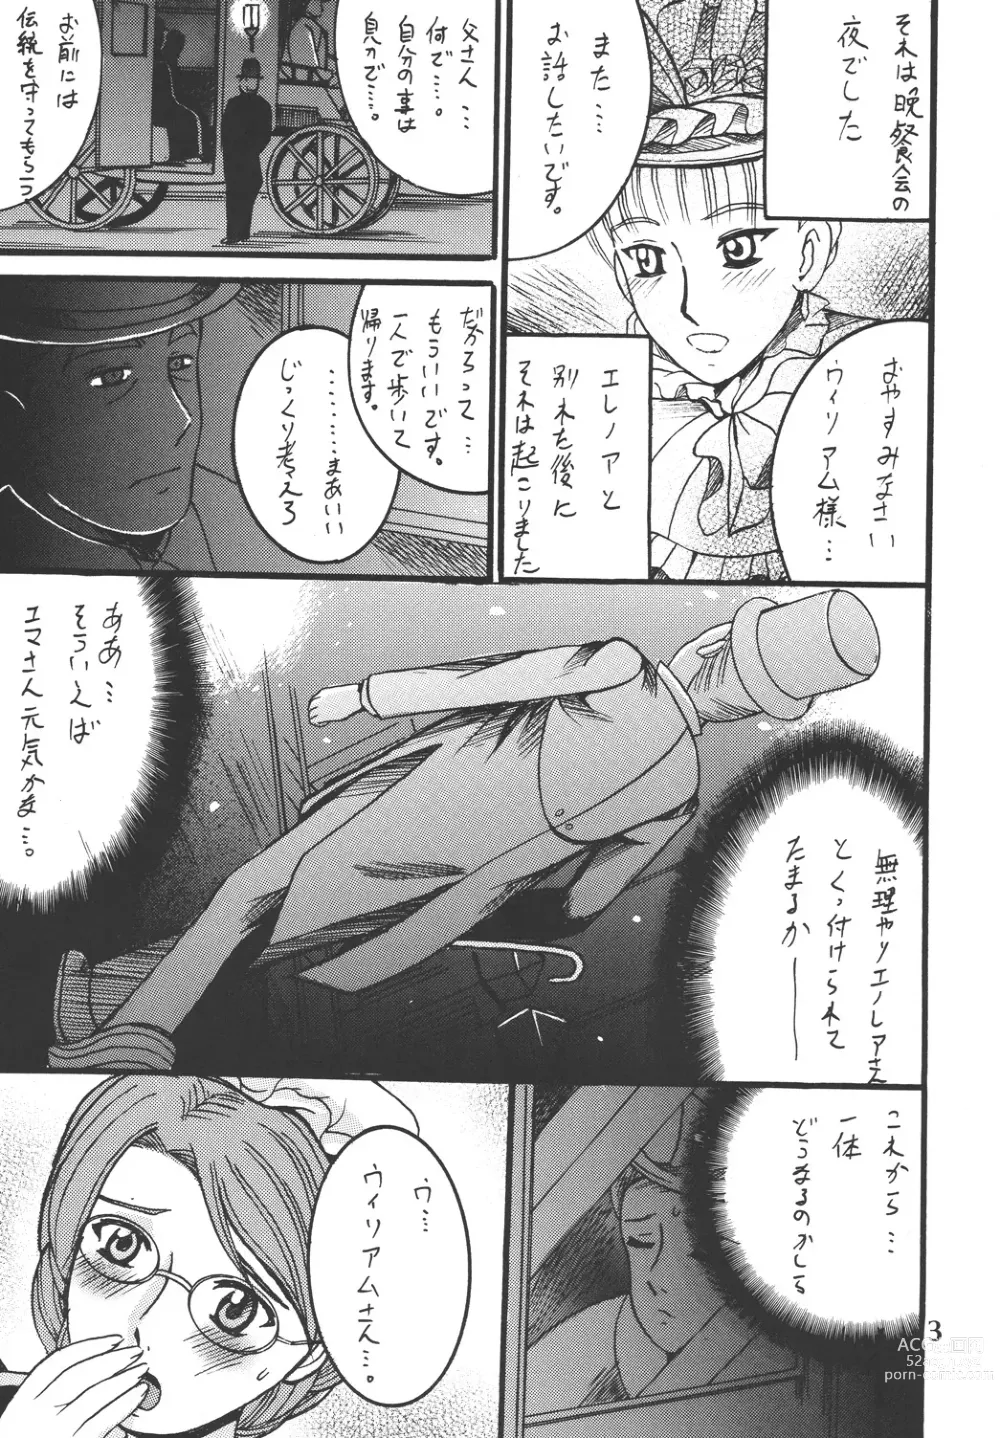 Page 3 of doujinshi Before the Emma Departure